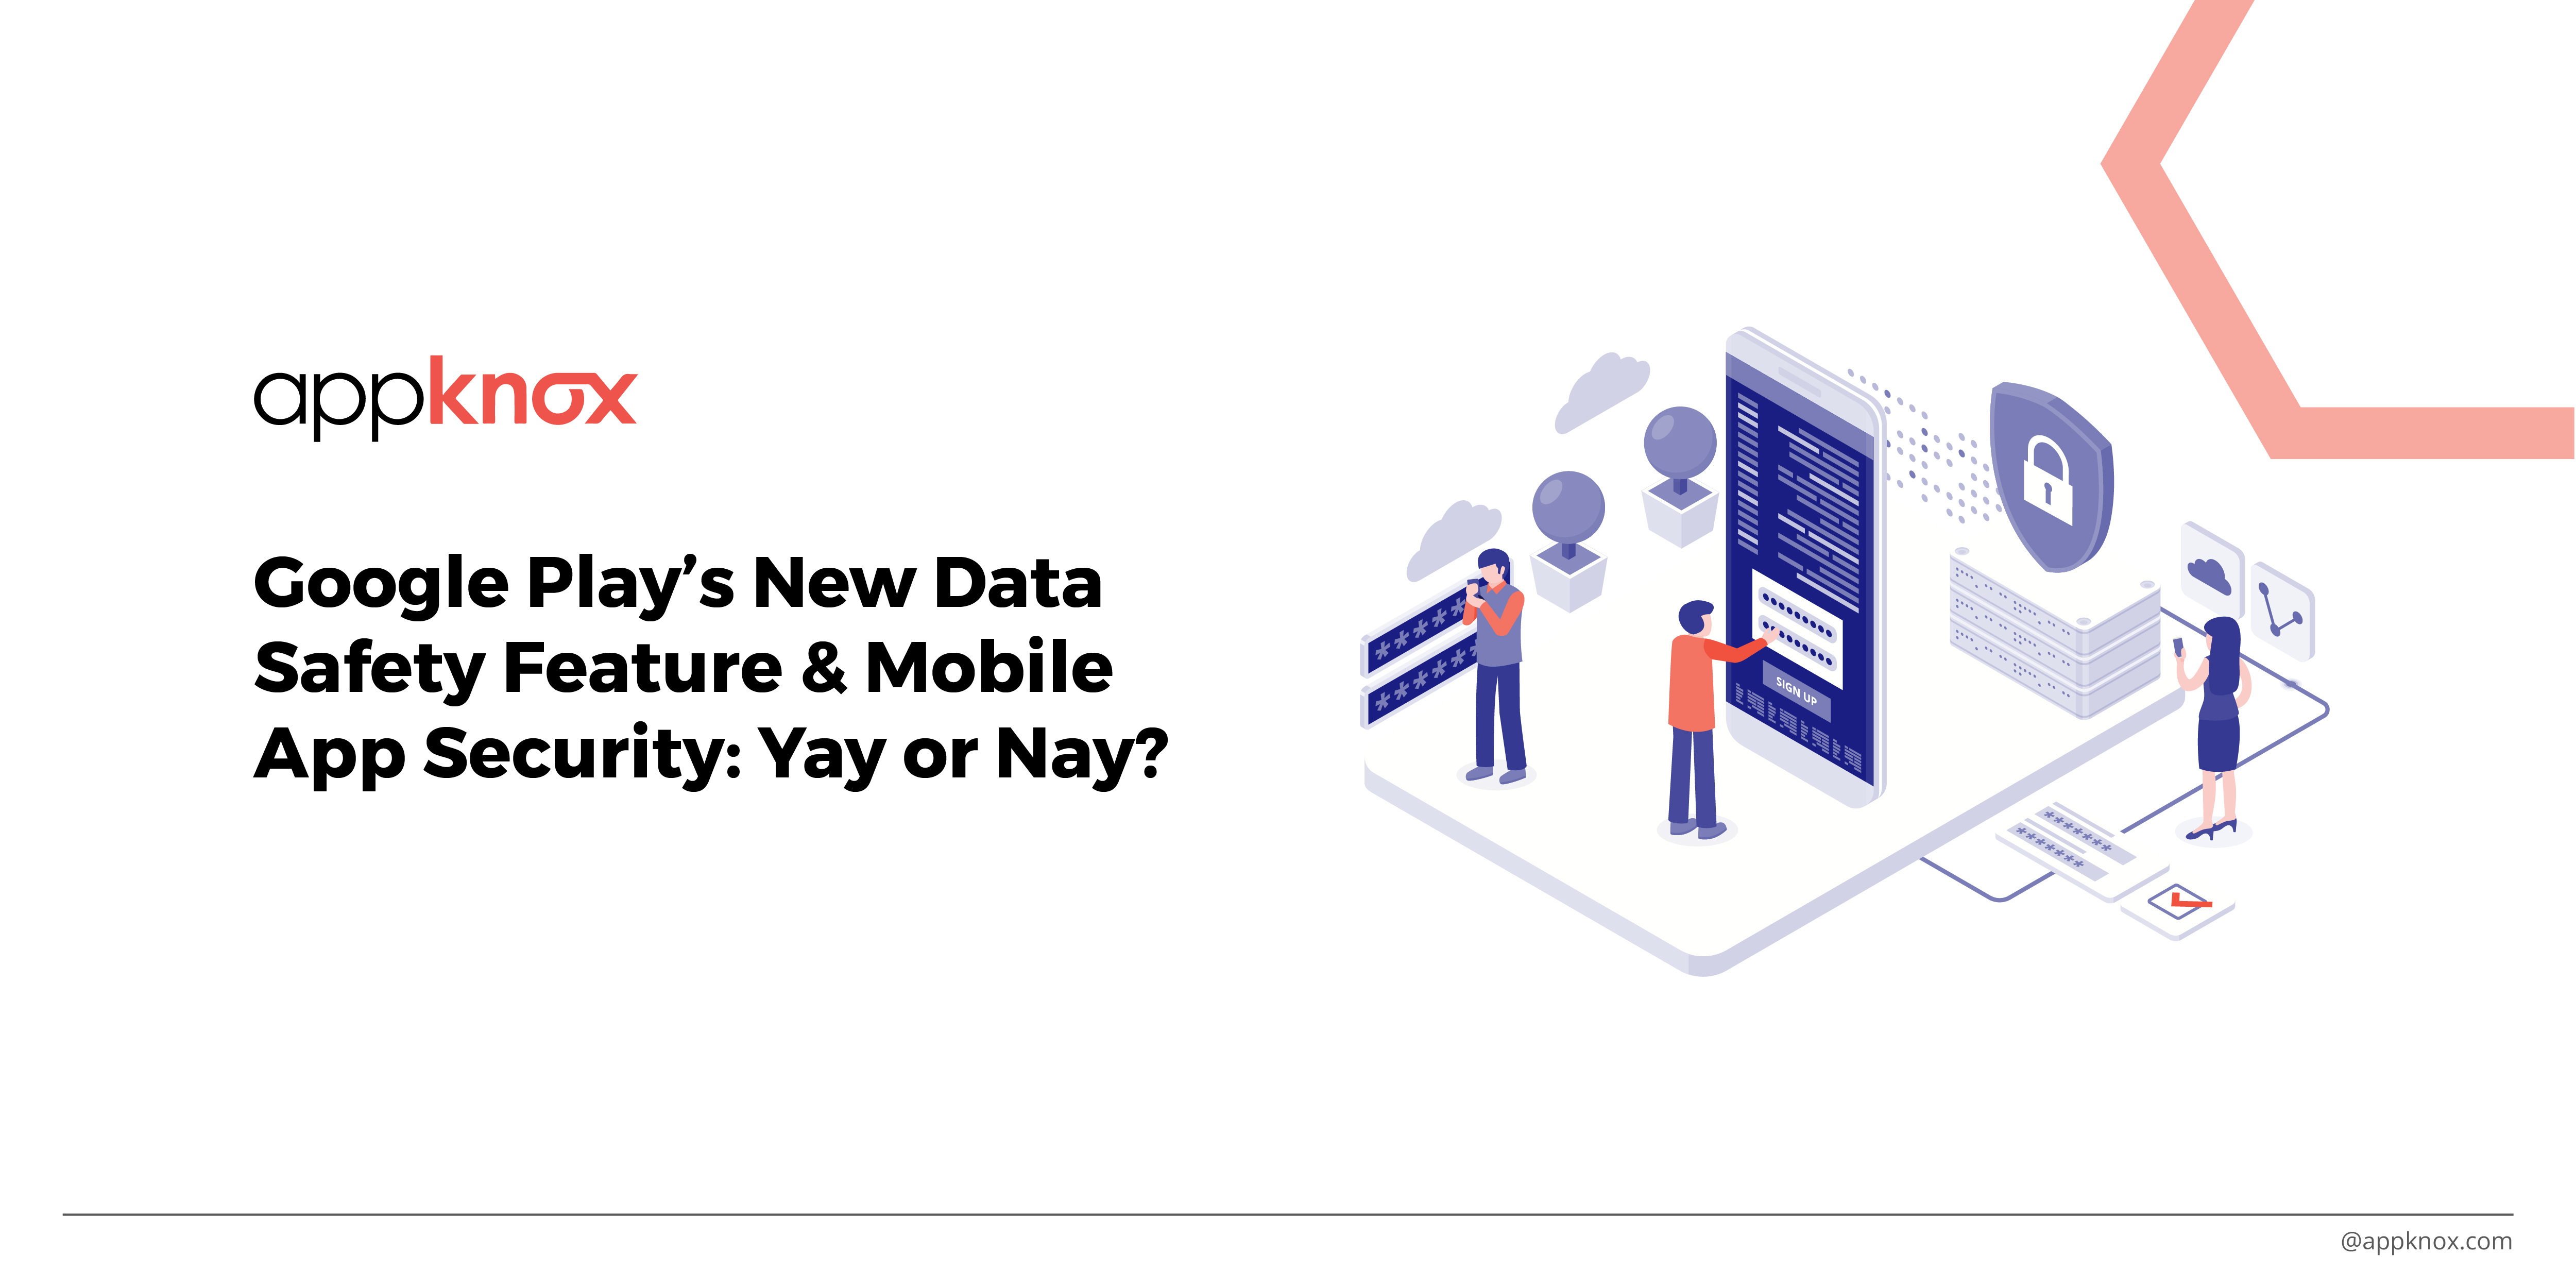 Mobile App Security & Google's Data Safety Launch - Yay or Nay?